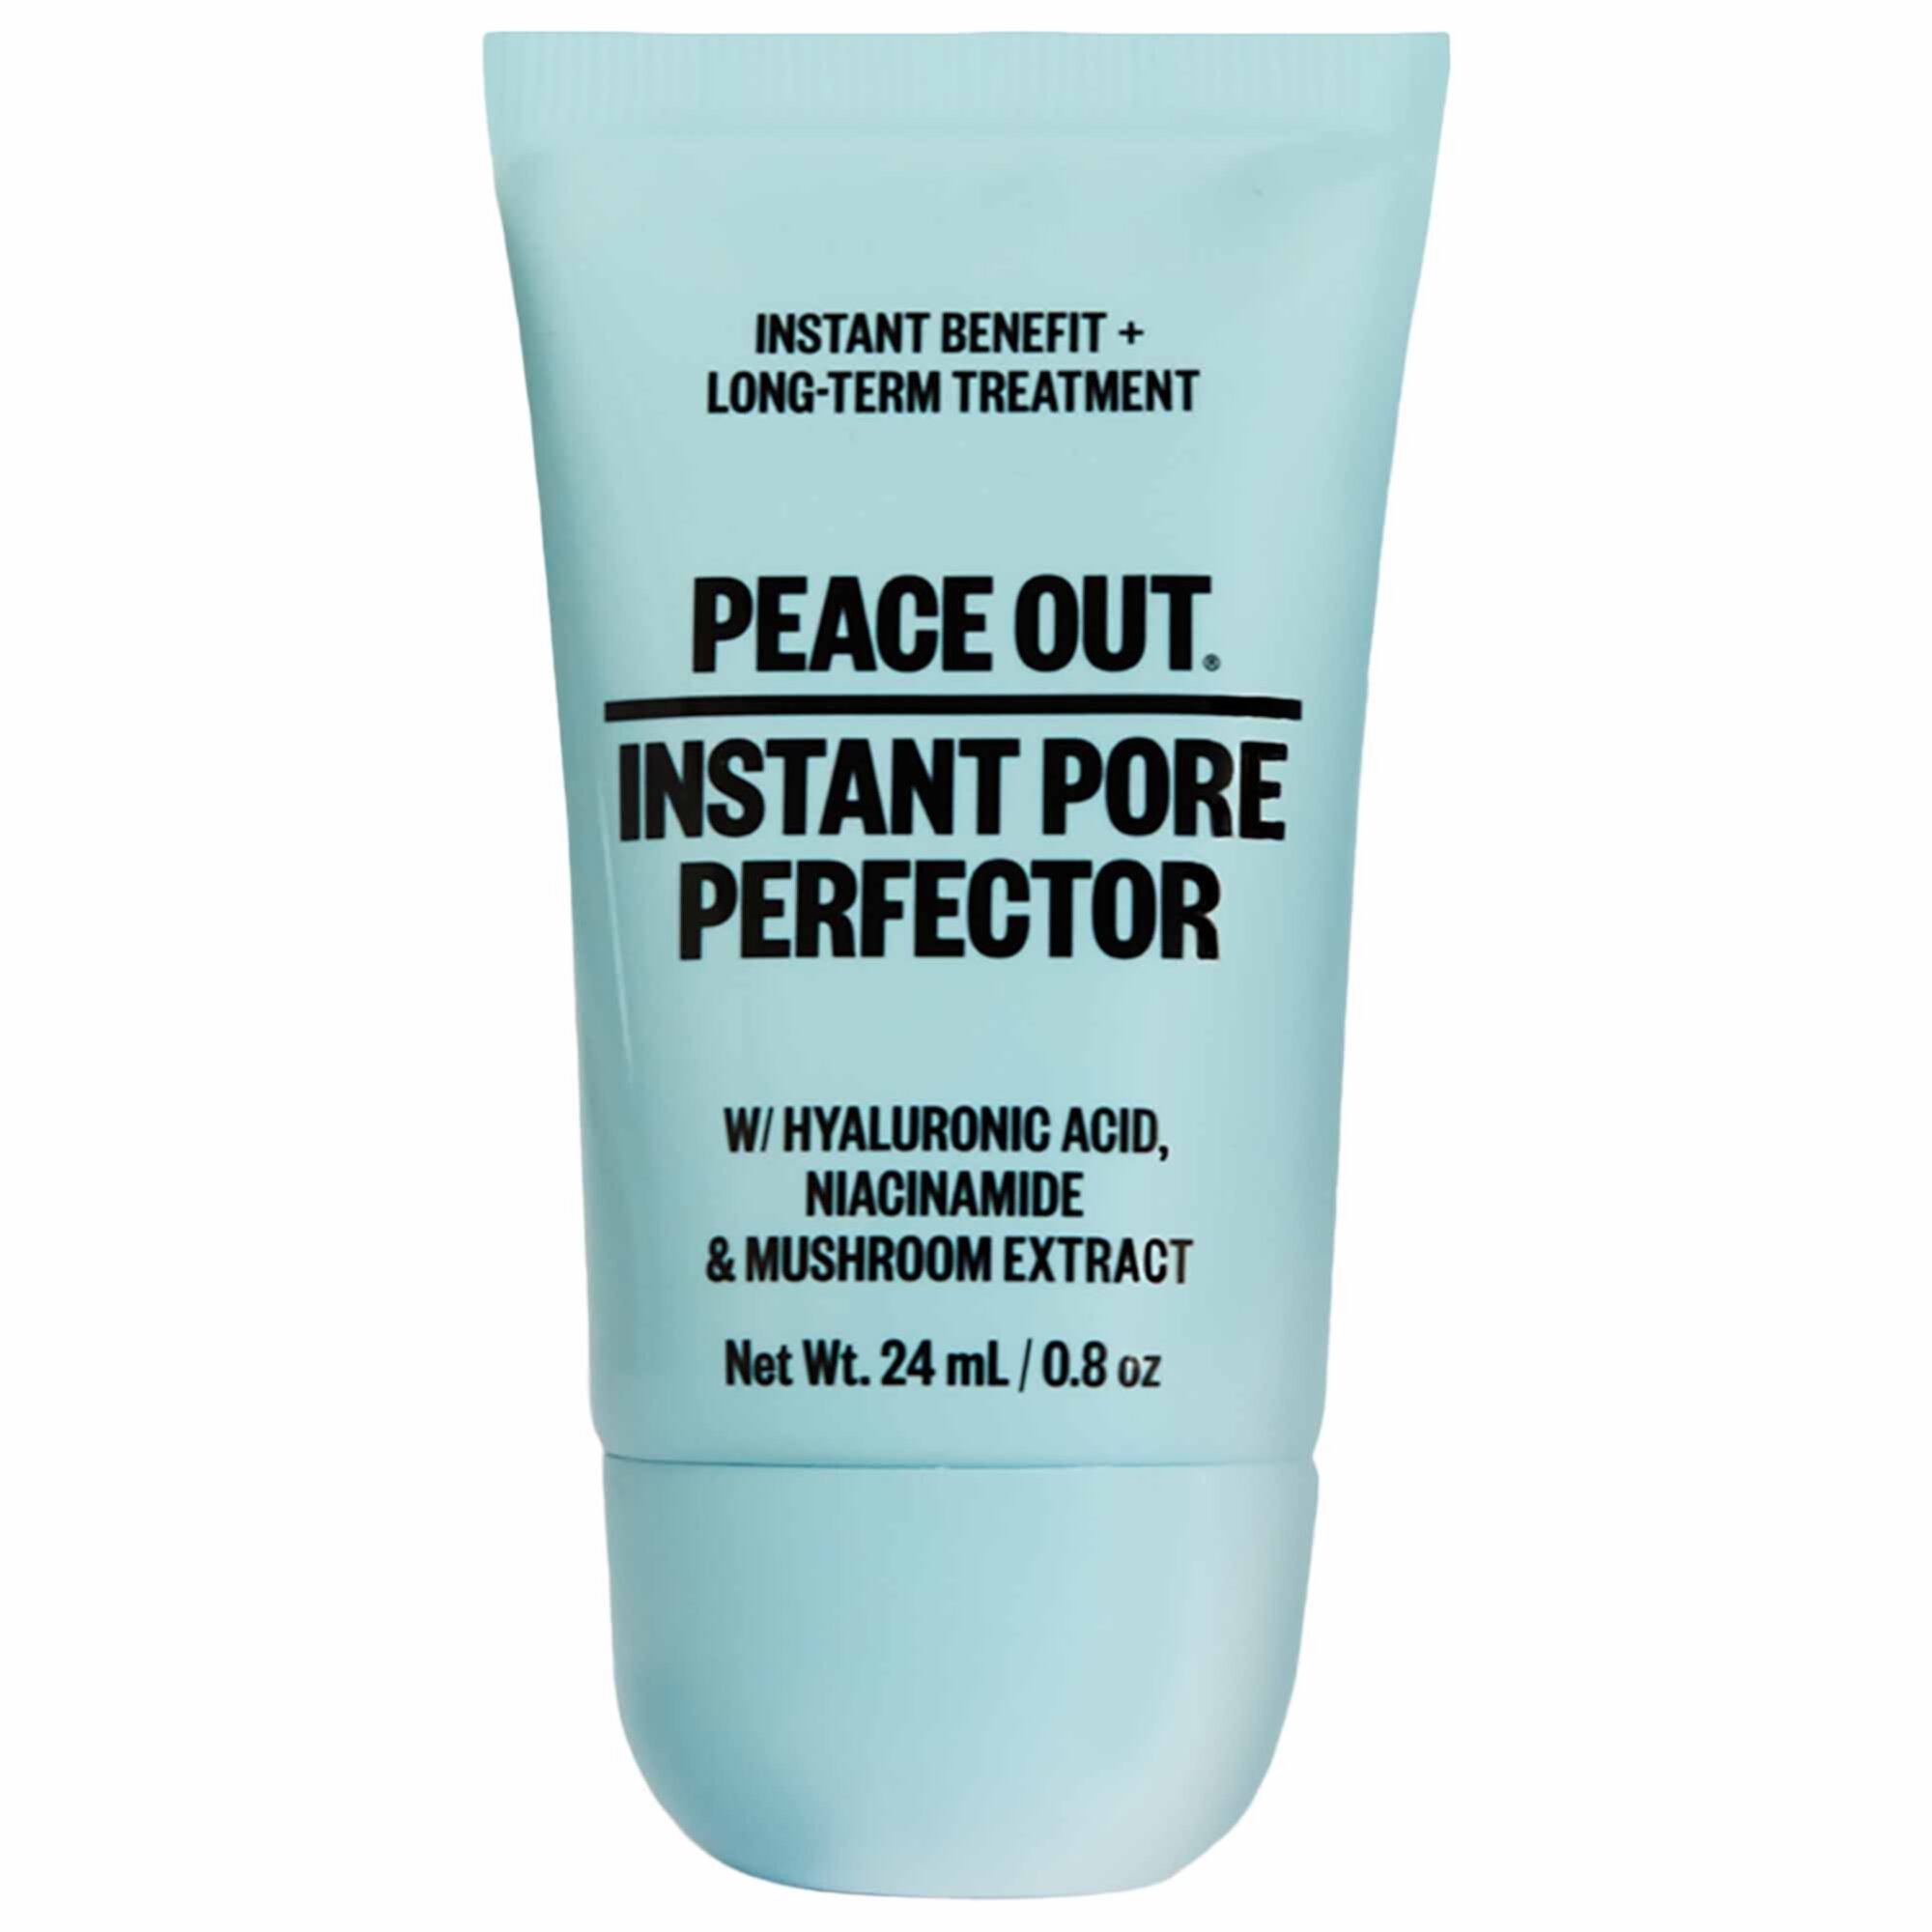 Instant Pore Perfector Peace Out